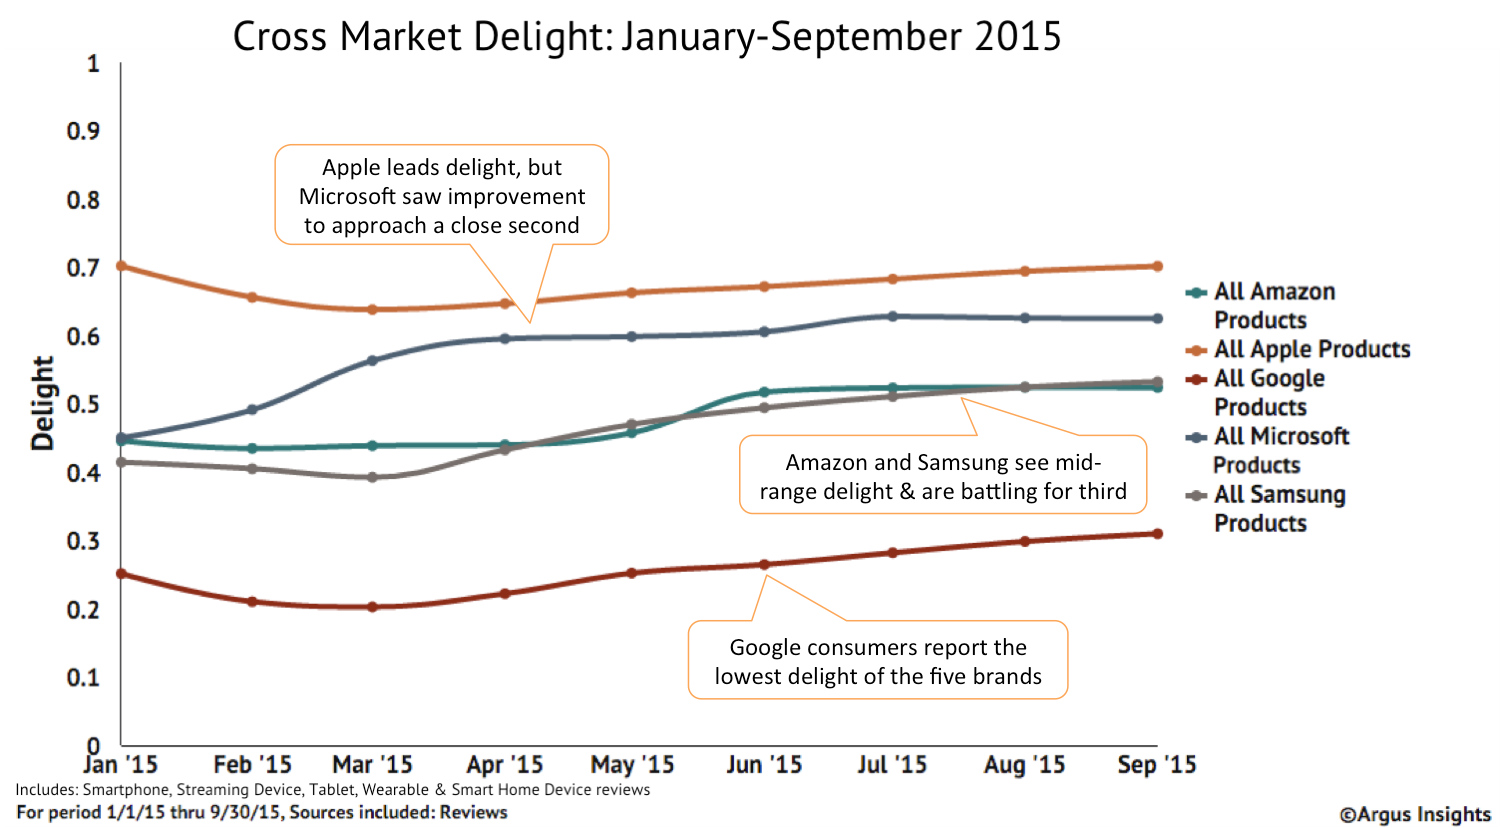 Apple attracts the happiest consumers, while Google products are causing disappointment (delight represents likelihood of consumer promotion, based on consumer reviews)